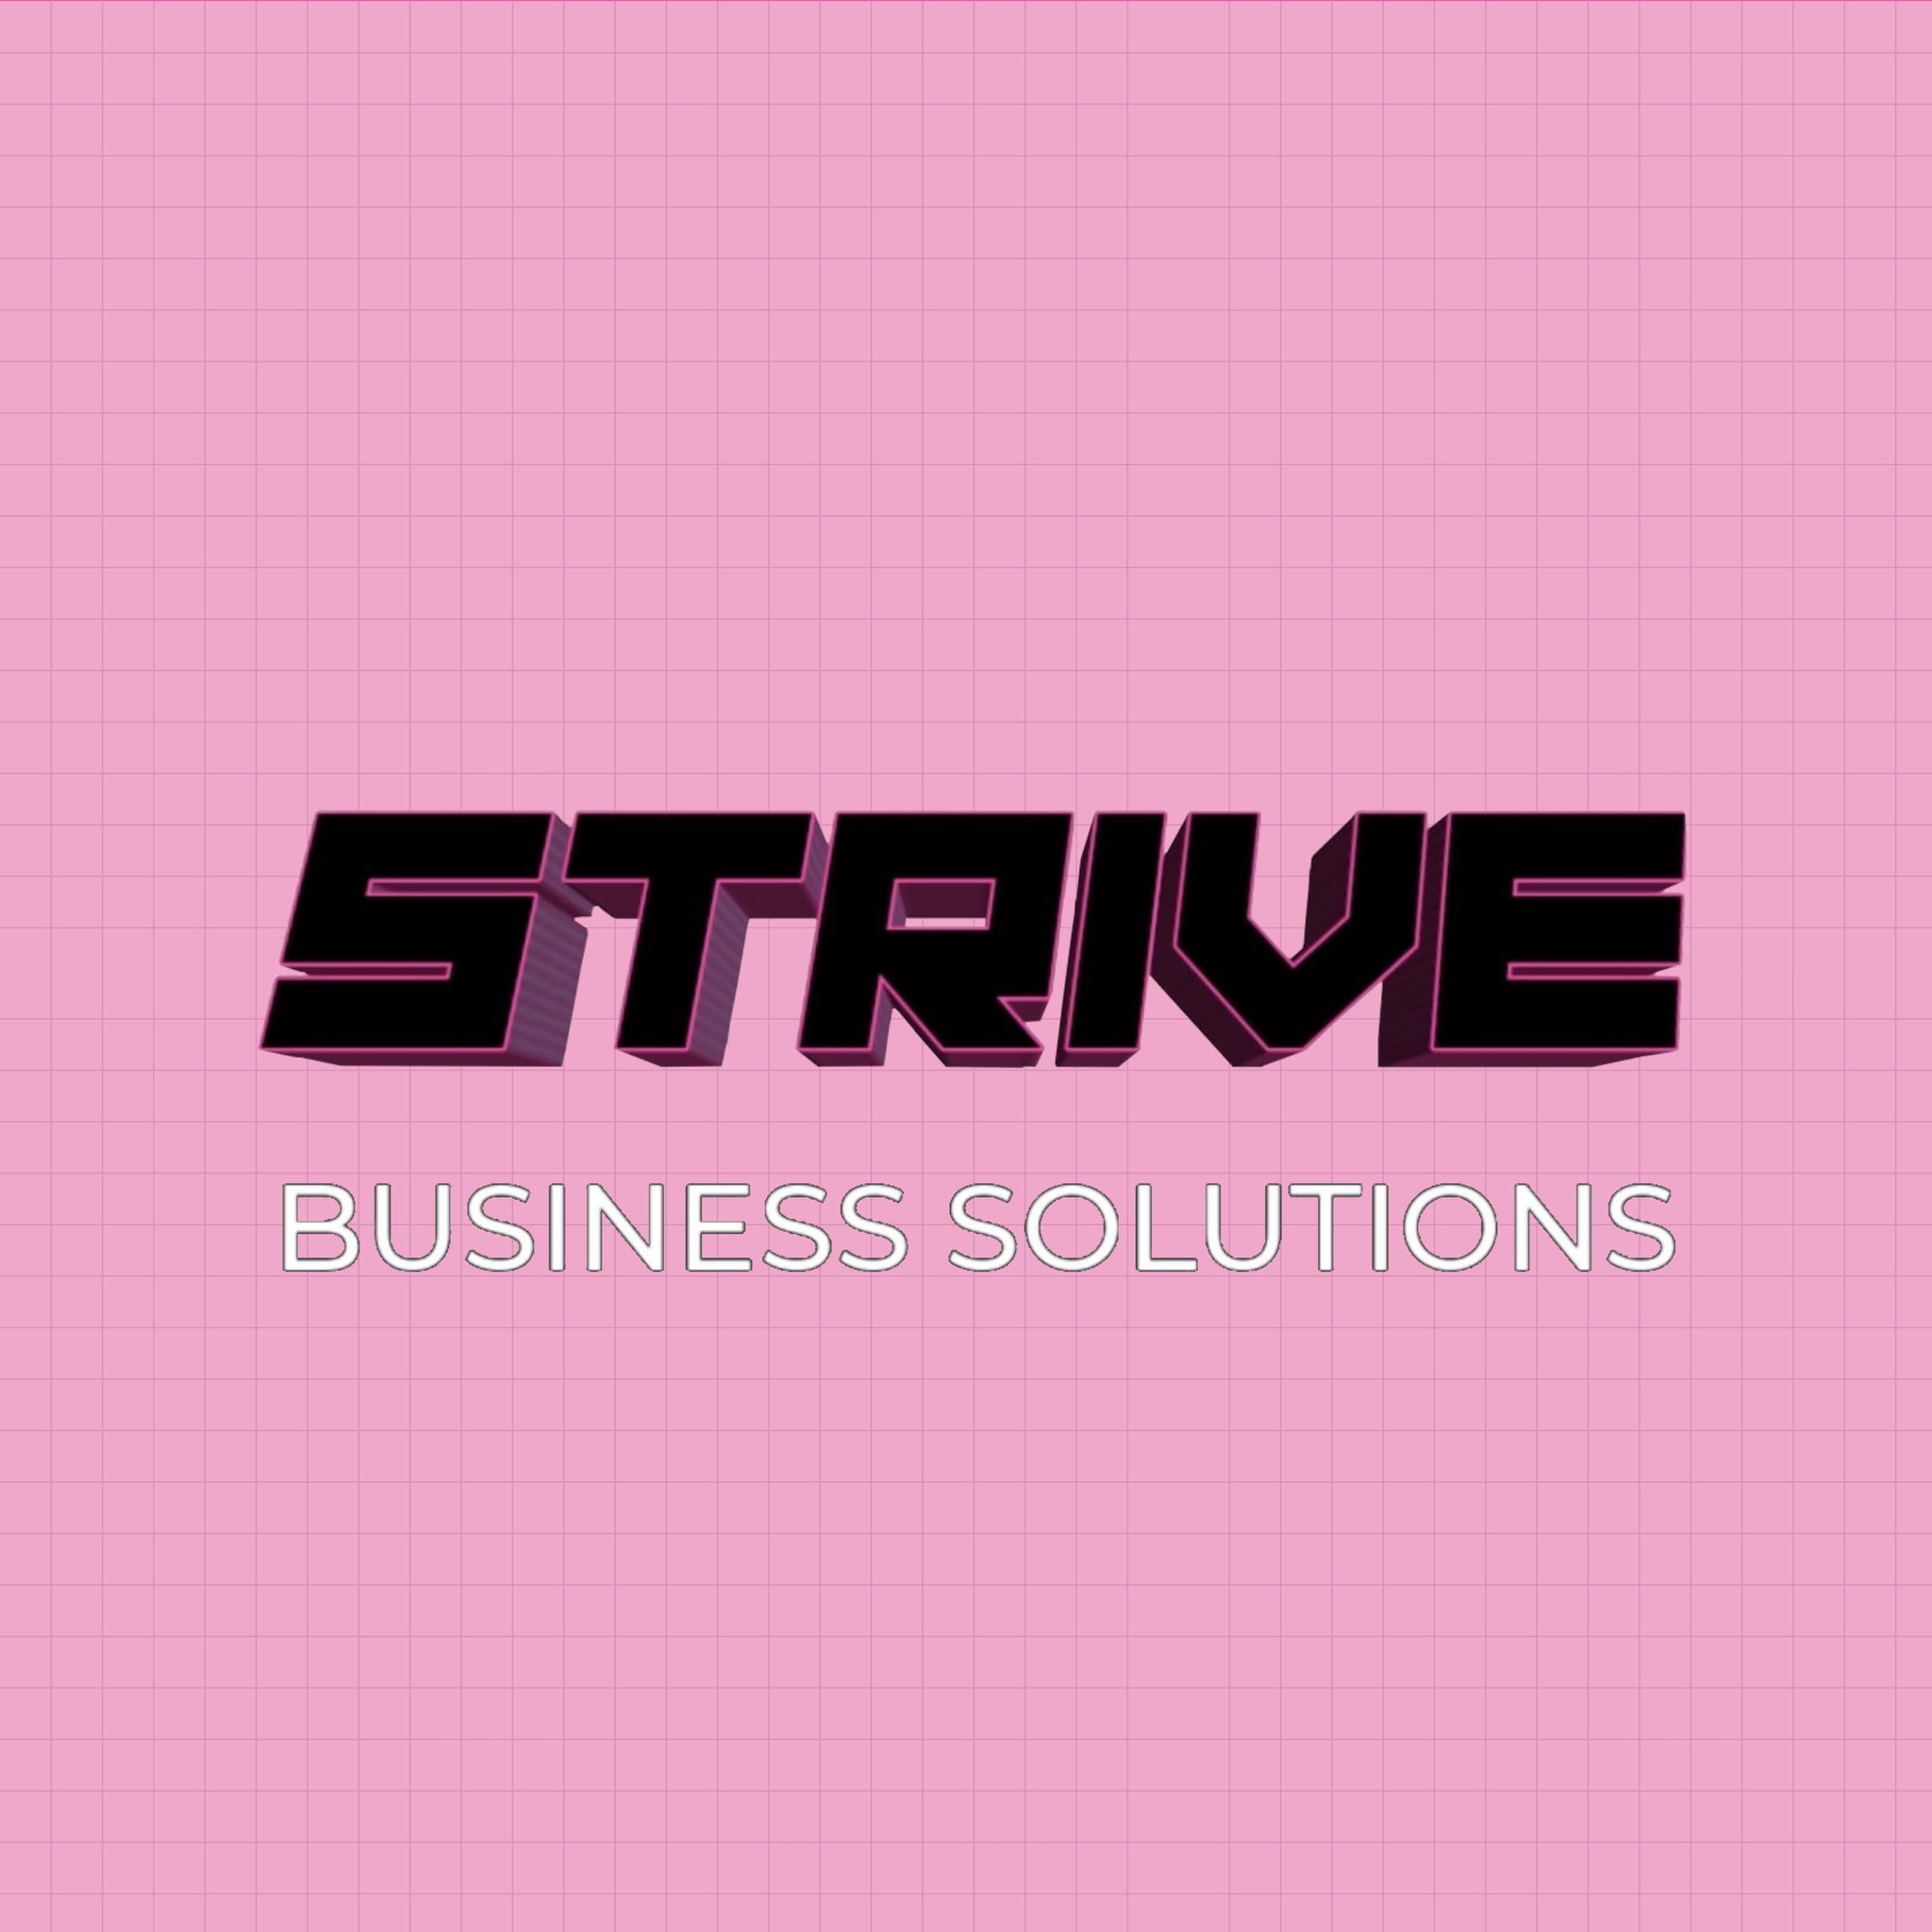 Logo of Strive Business Solutions